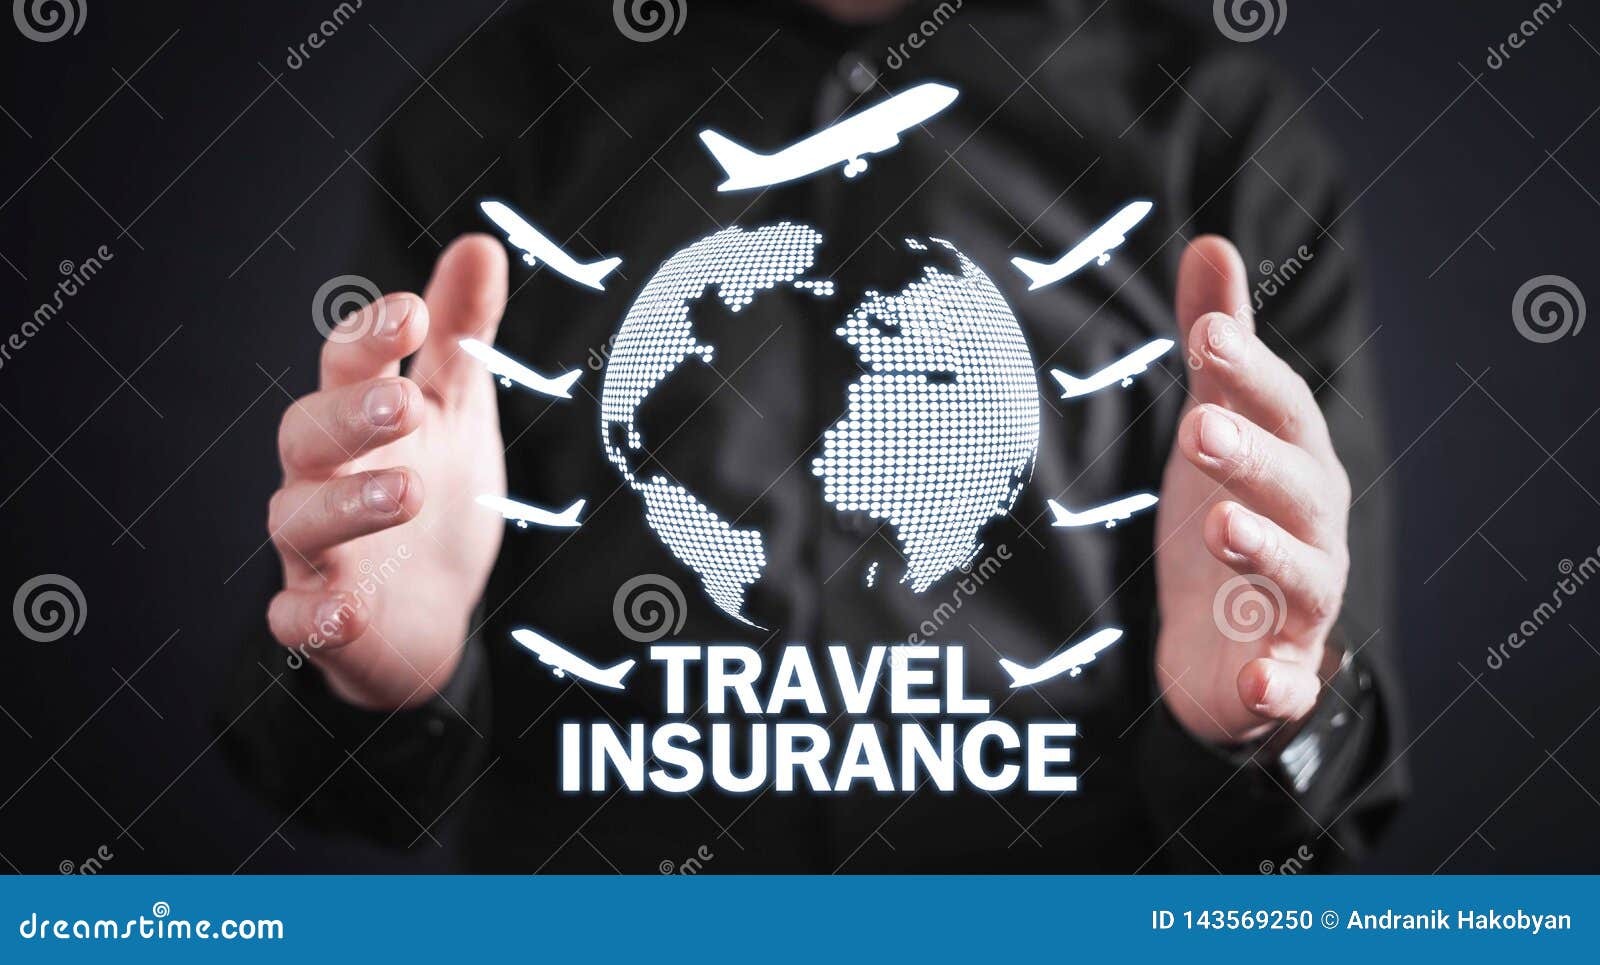 Man Holding Globe With Airplanes. Travel Insurance Stock Photo - Image of text, flight: 143569250